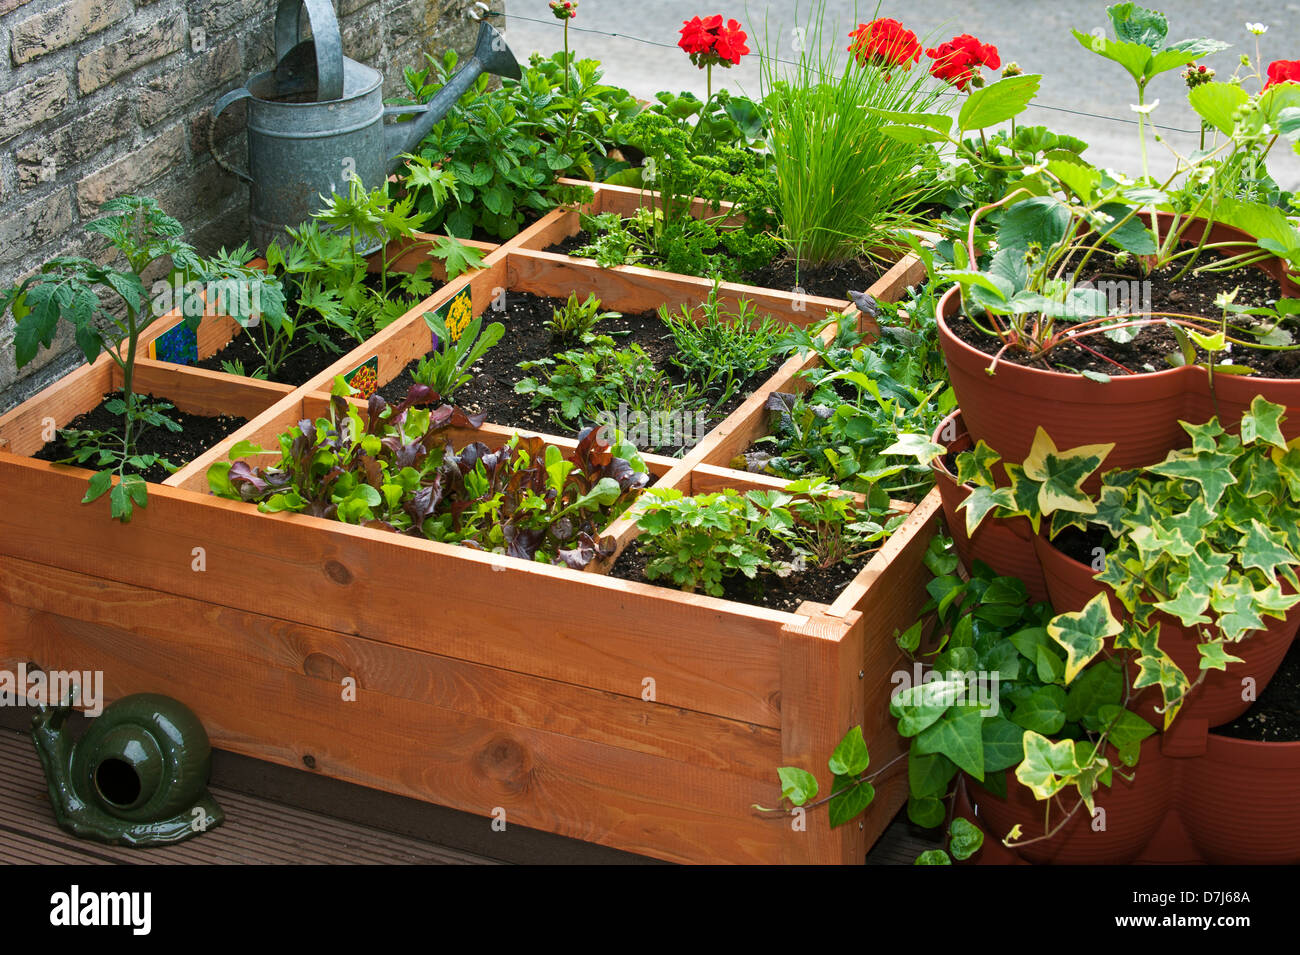 Square foot gardening by planting flowers, herbs and vegetables in ...